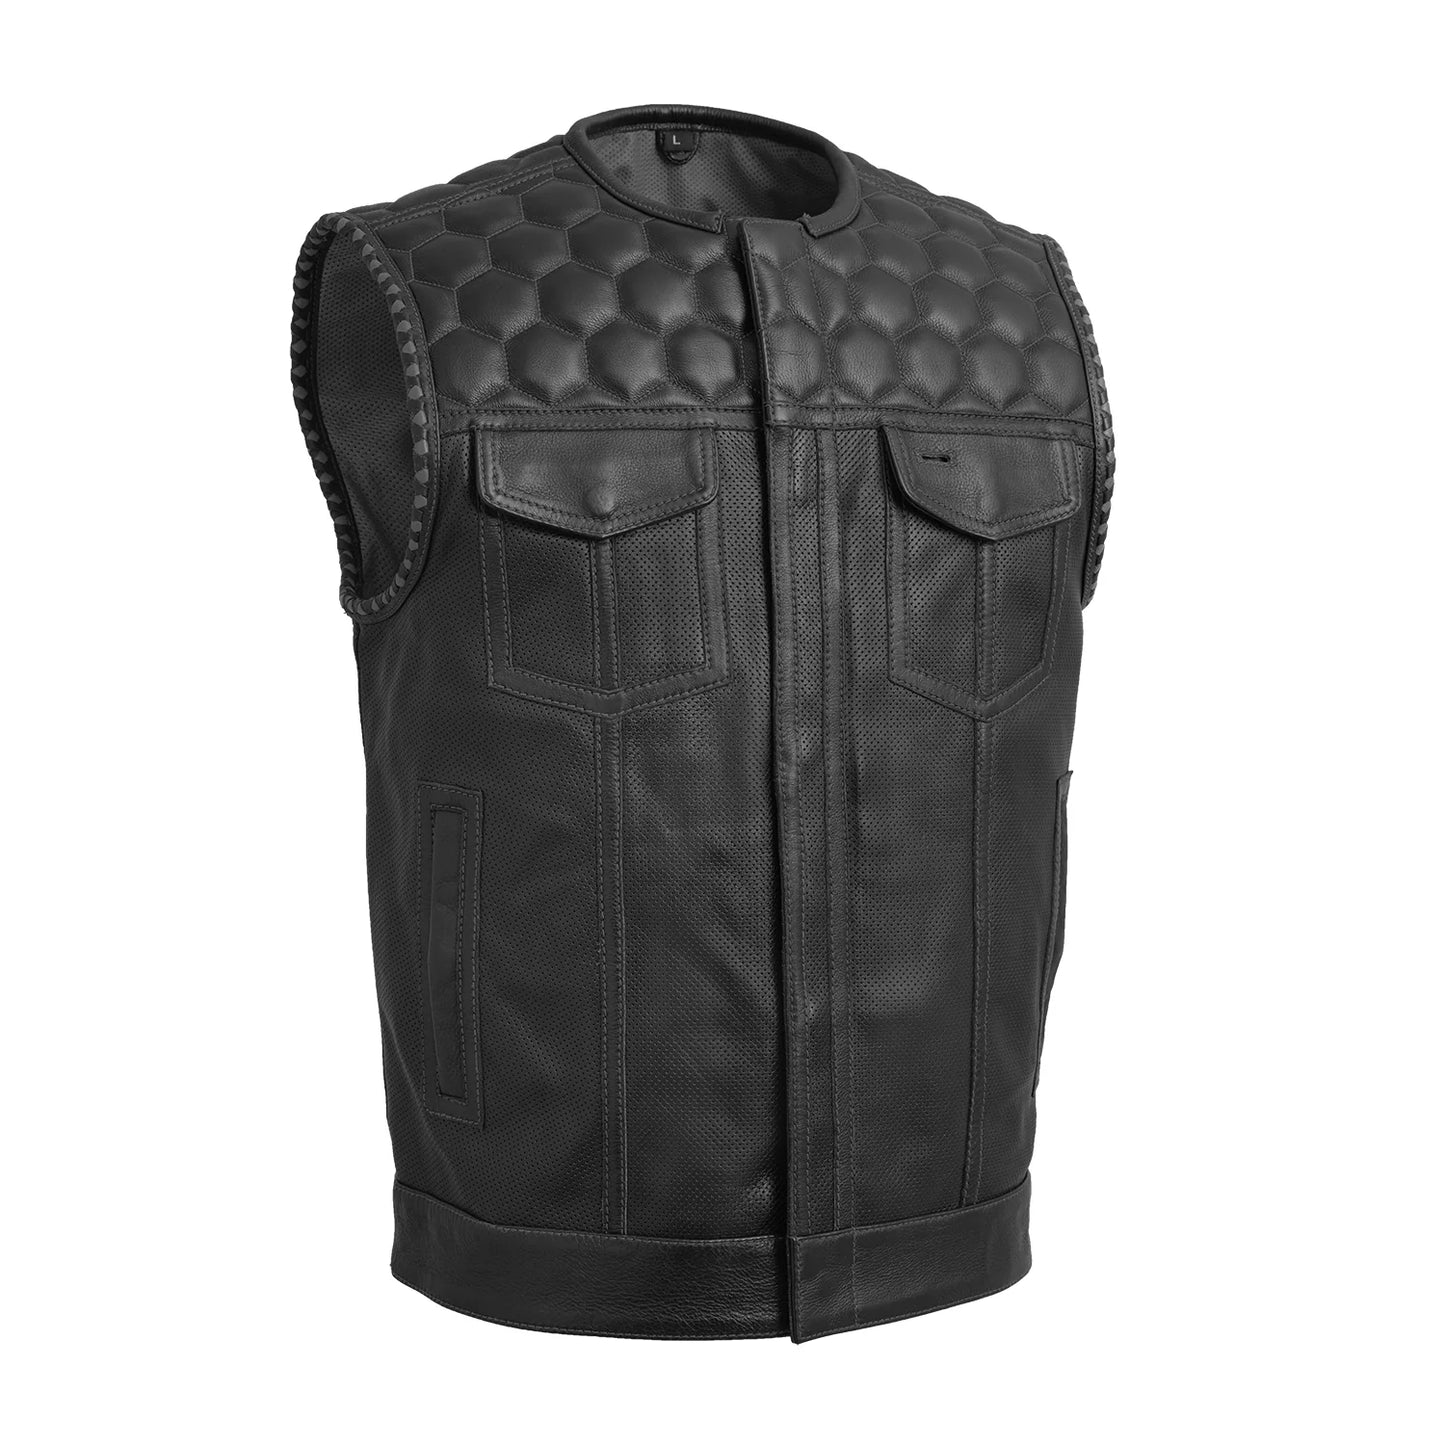 Hornet Perforated Men's Club Style Leather Vest Men's Leather Vest First Manufacturing Company Black Black S 